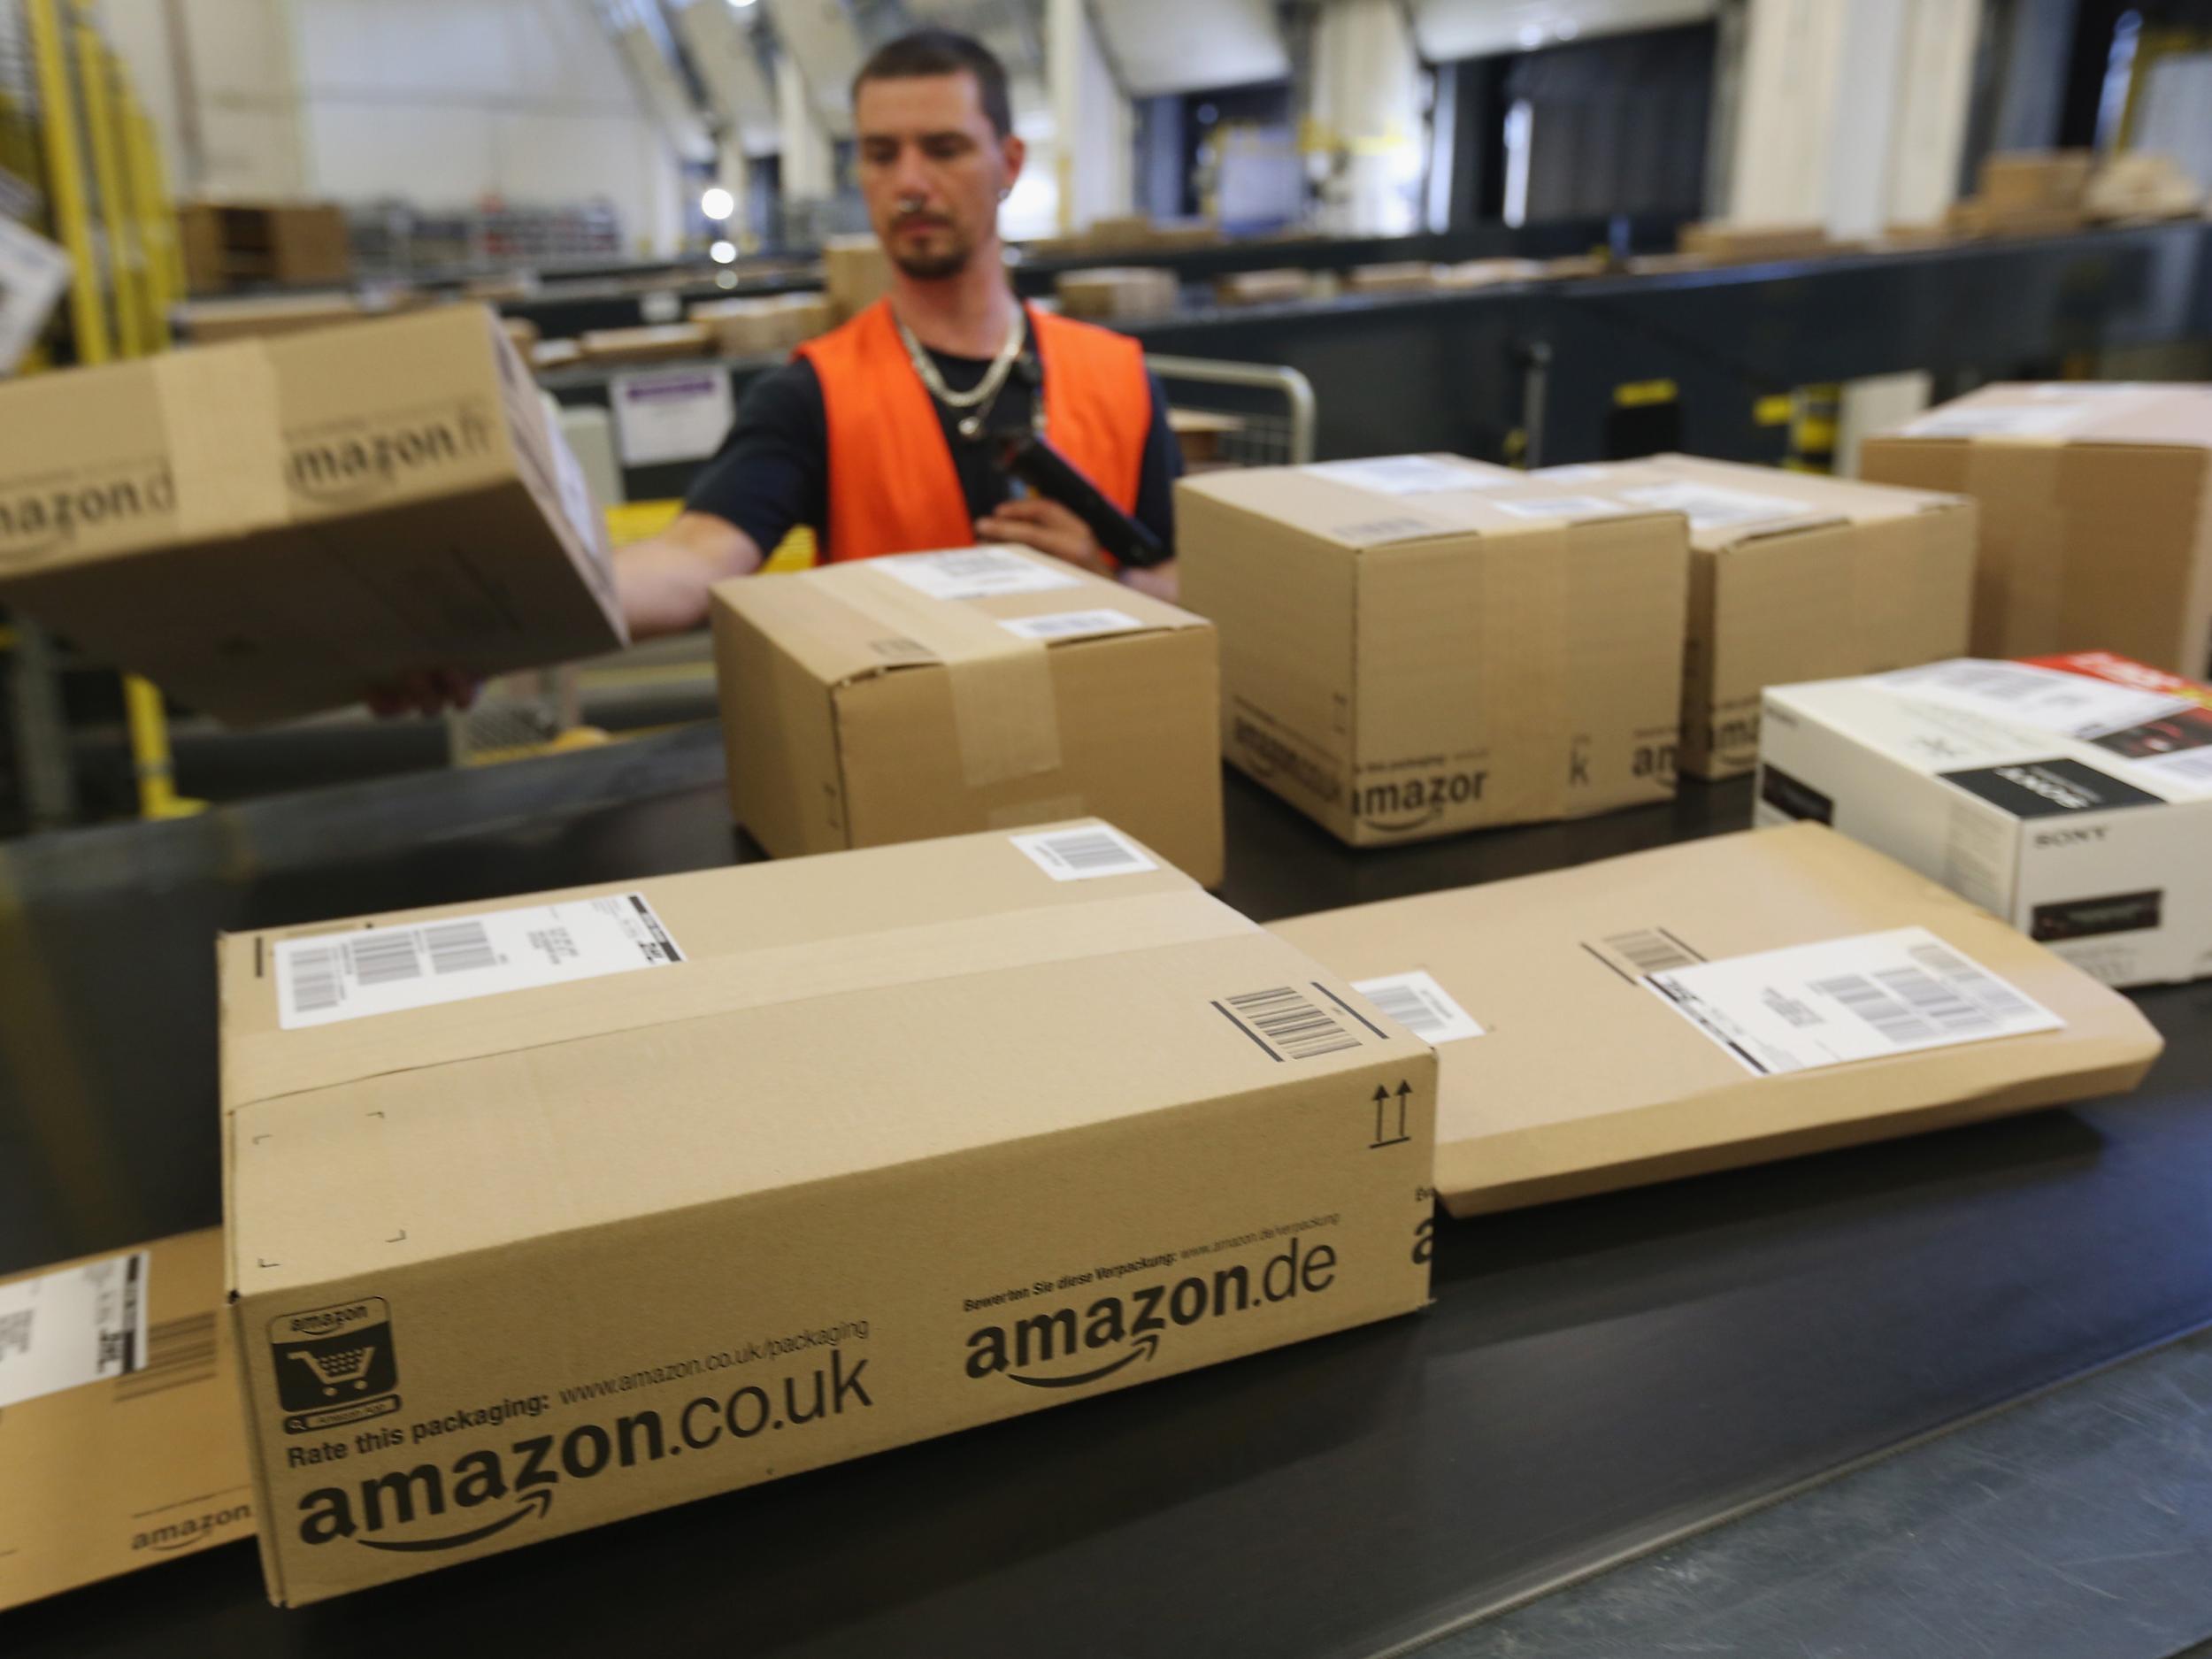 Amazon's new clothing line will be delivered from here like a myriad of other products